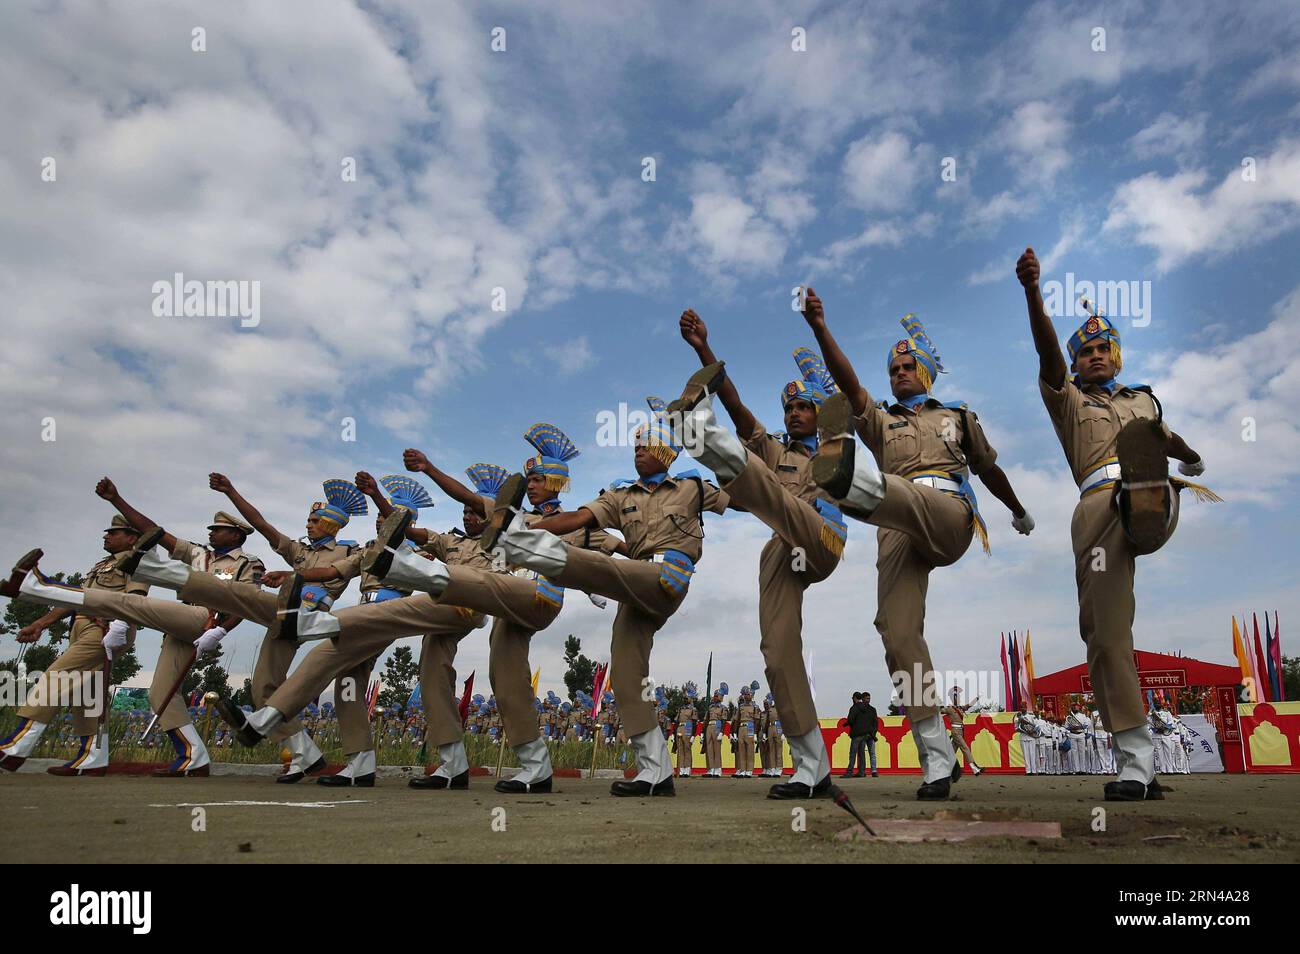 (150514) -- SRINAGAR, May 14, 2015 -- Recruits of India s Central Reserve Police Force (CRPF) march during a passing-out parade at a training center on the outskirts of Srinagar, the summer capital of Indian-controlled Kashmir, May 14, 2015. A total of 341 recruits were formally inducted into the India s CRPF after completing nine months of rigorous training in physical fitness, weapon handling, commando operations and counter insurgency, a CRPF spokesman said. ) (azp) KASHMIR-SRINAGAR-PASSING-OUT PARADE JavedxDar PUBLICATIONxNOTxINxCHN   150514 Srinagar May 14 2015 recruits of India S Central Stock Photo